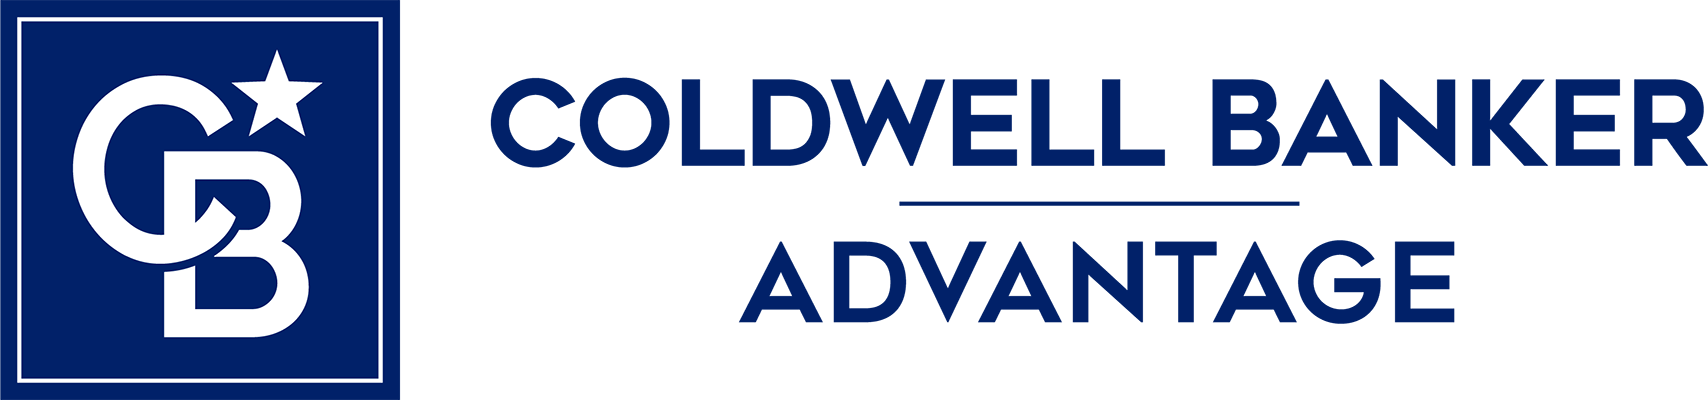 Cary Strickland - Coldwell Banker Advantage Logo